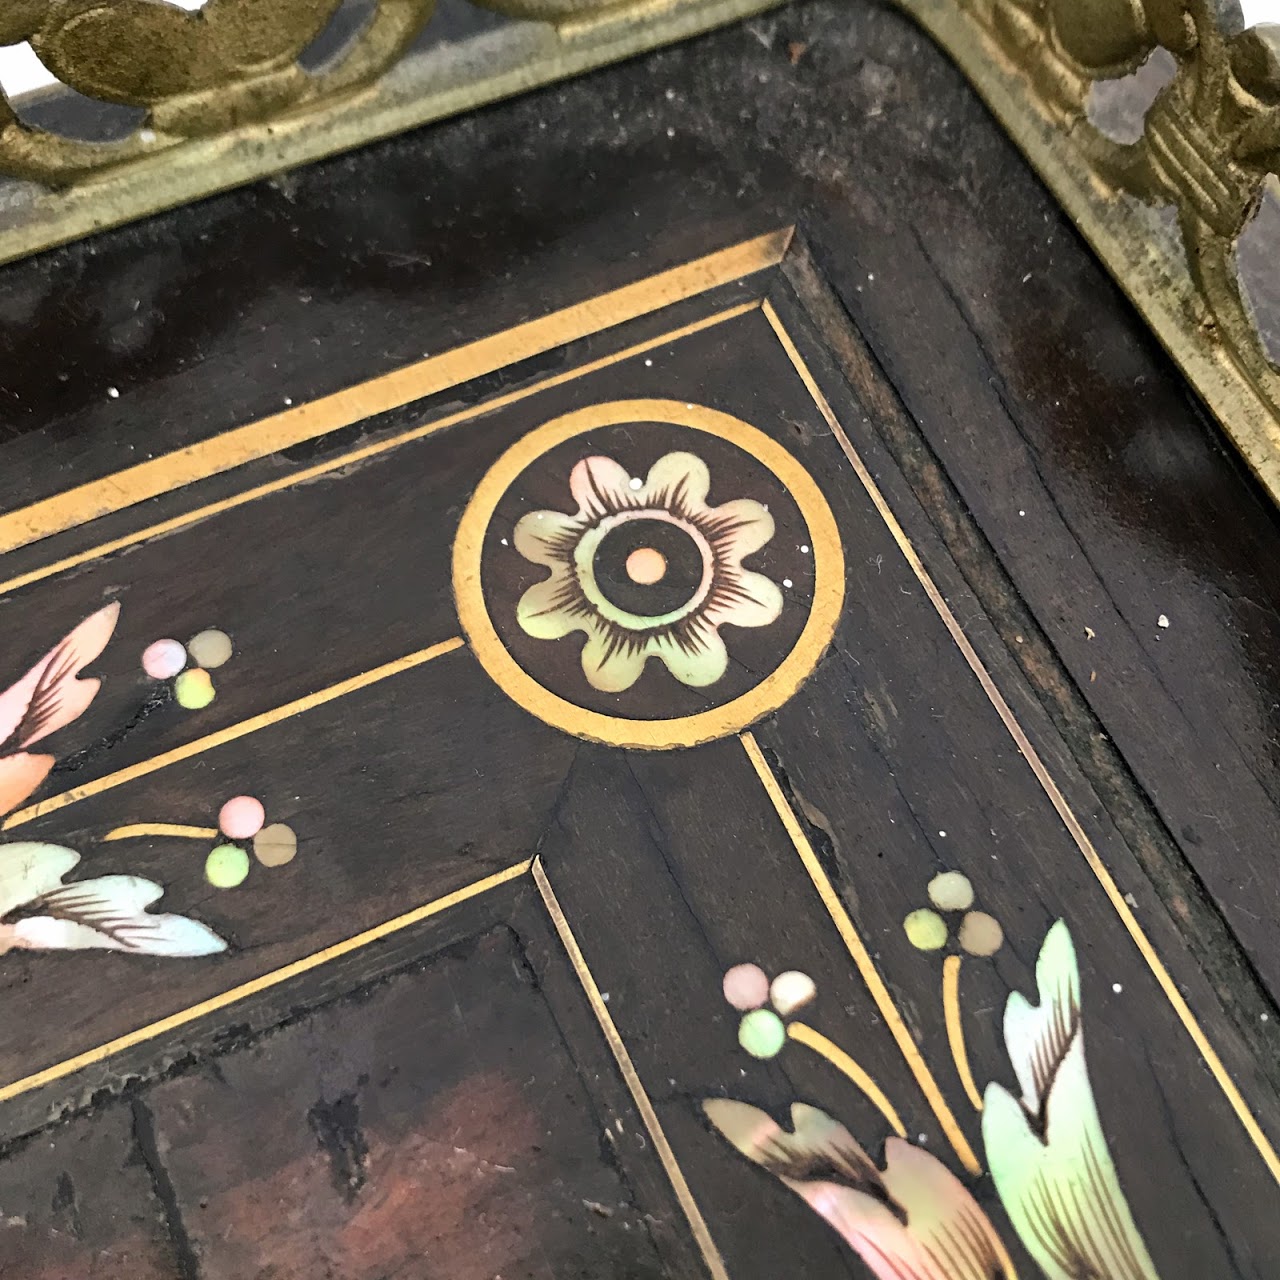 Marquetry & Mother of Pearl Inlaid Ormolu Mounted Tiered End Table